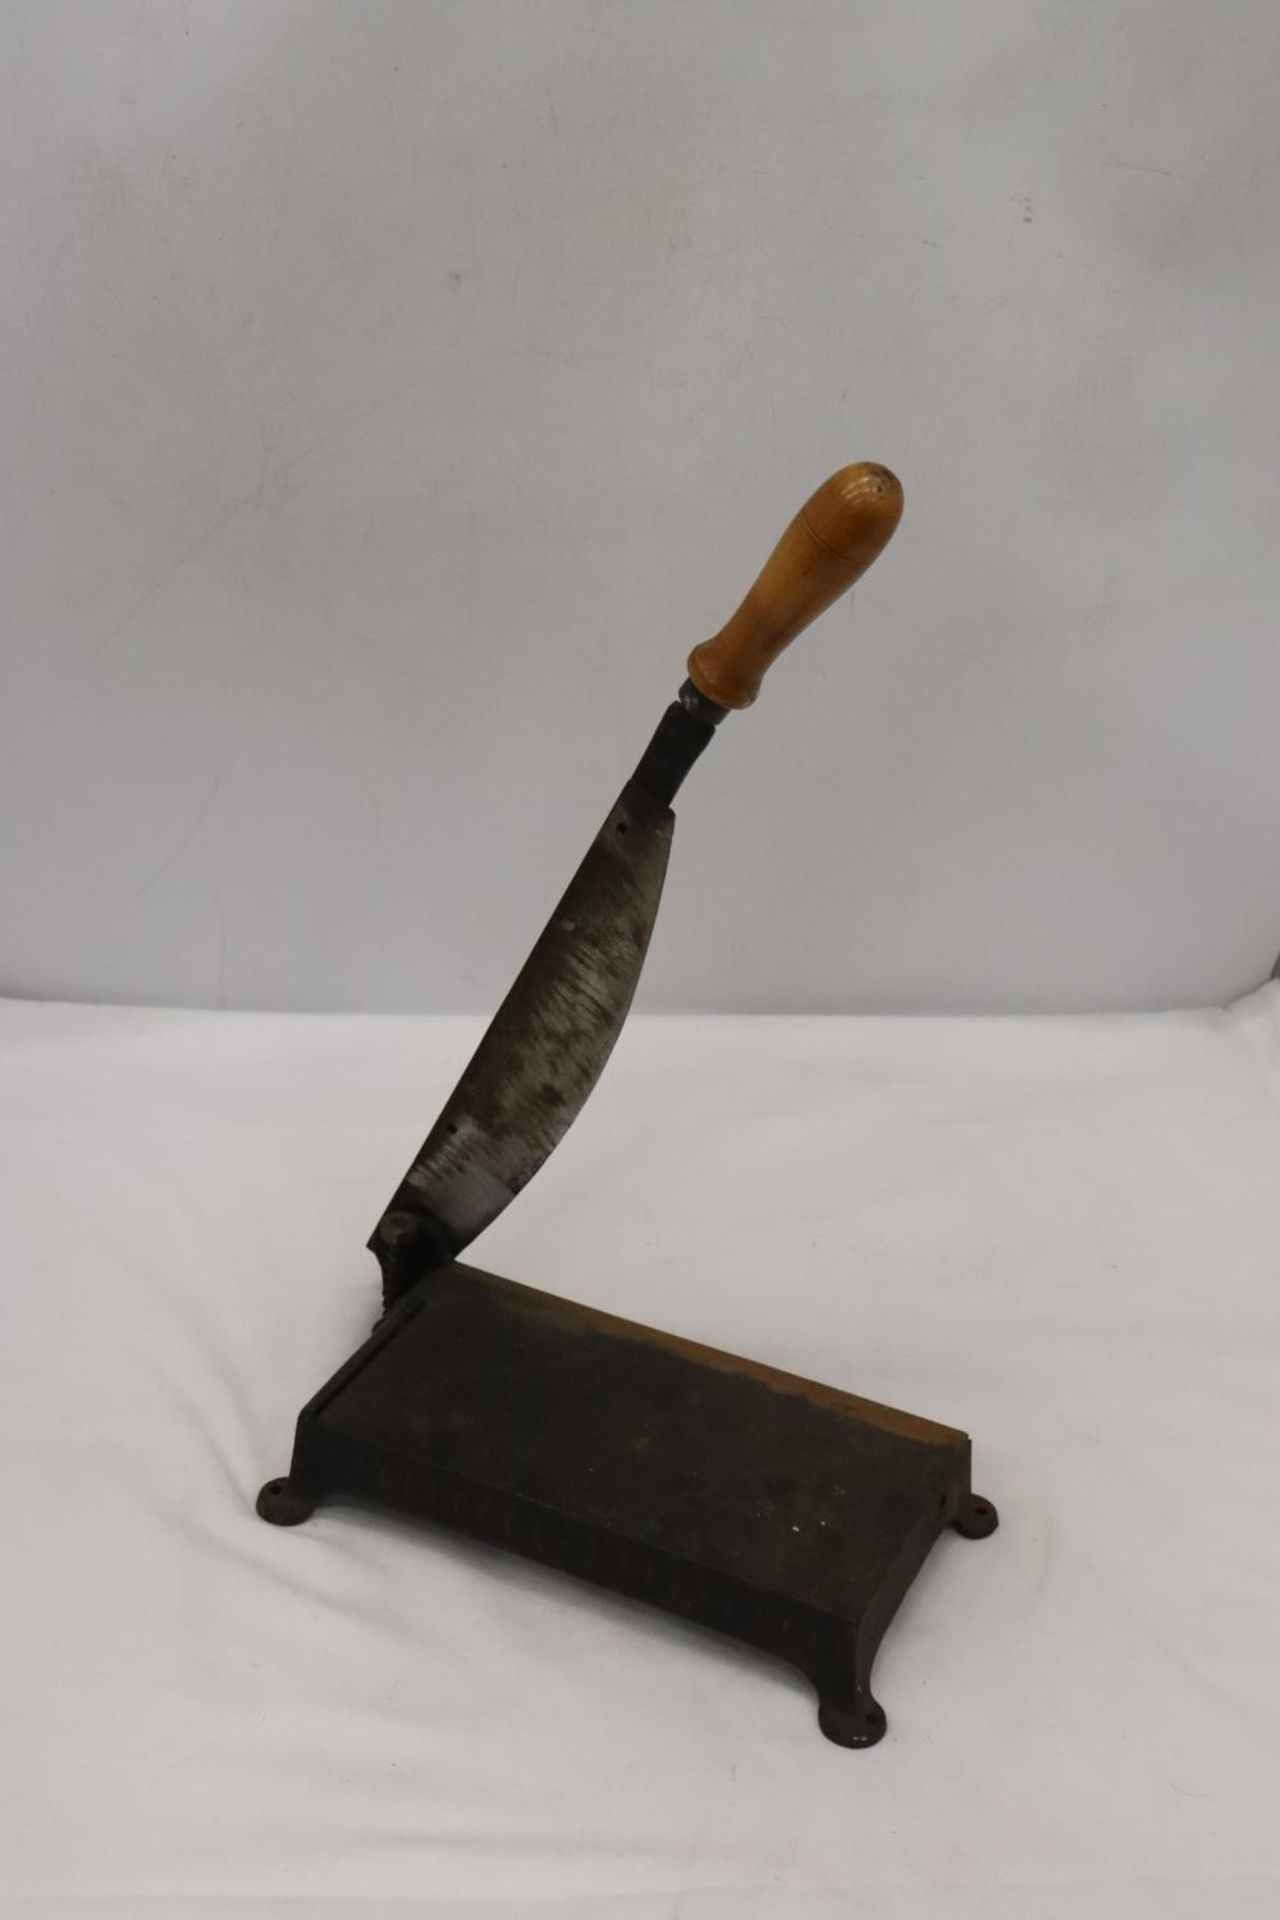 A VERY SHARP VINTAGE CAST GUILLOTINE - Image 4 of 7